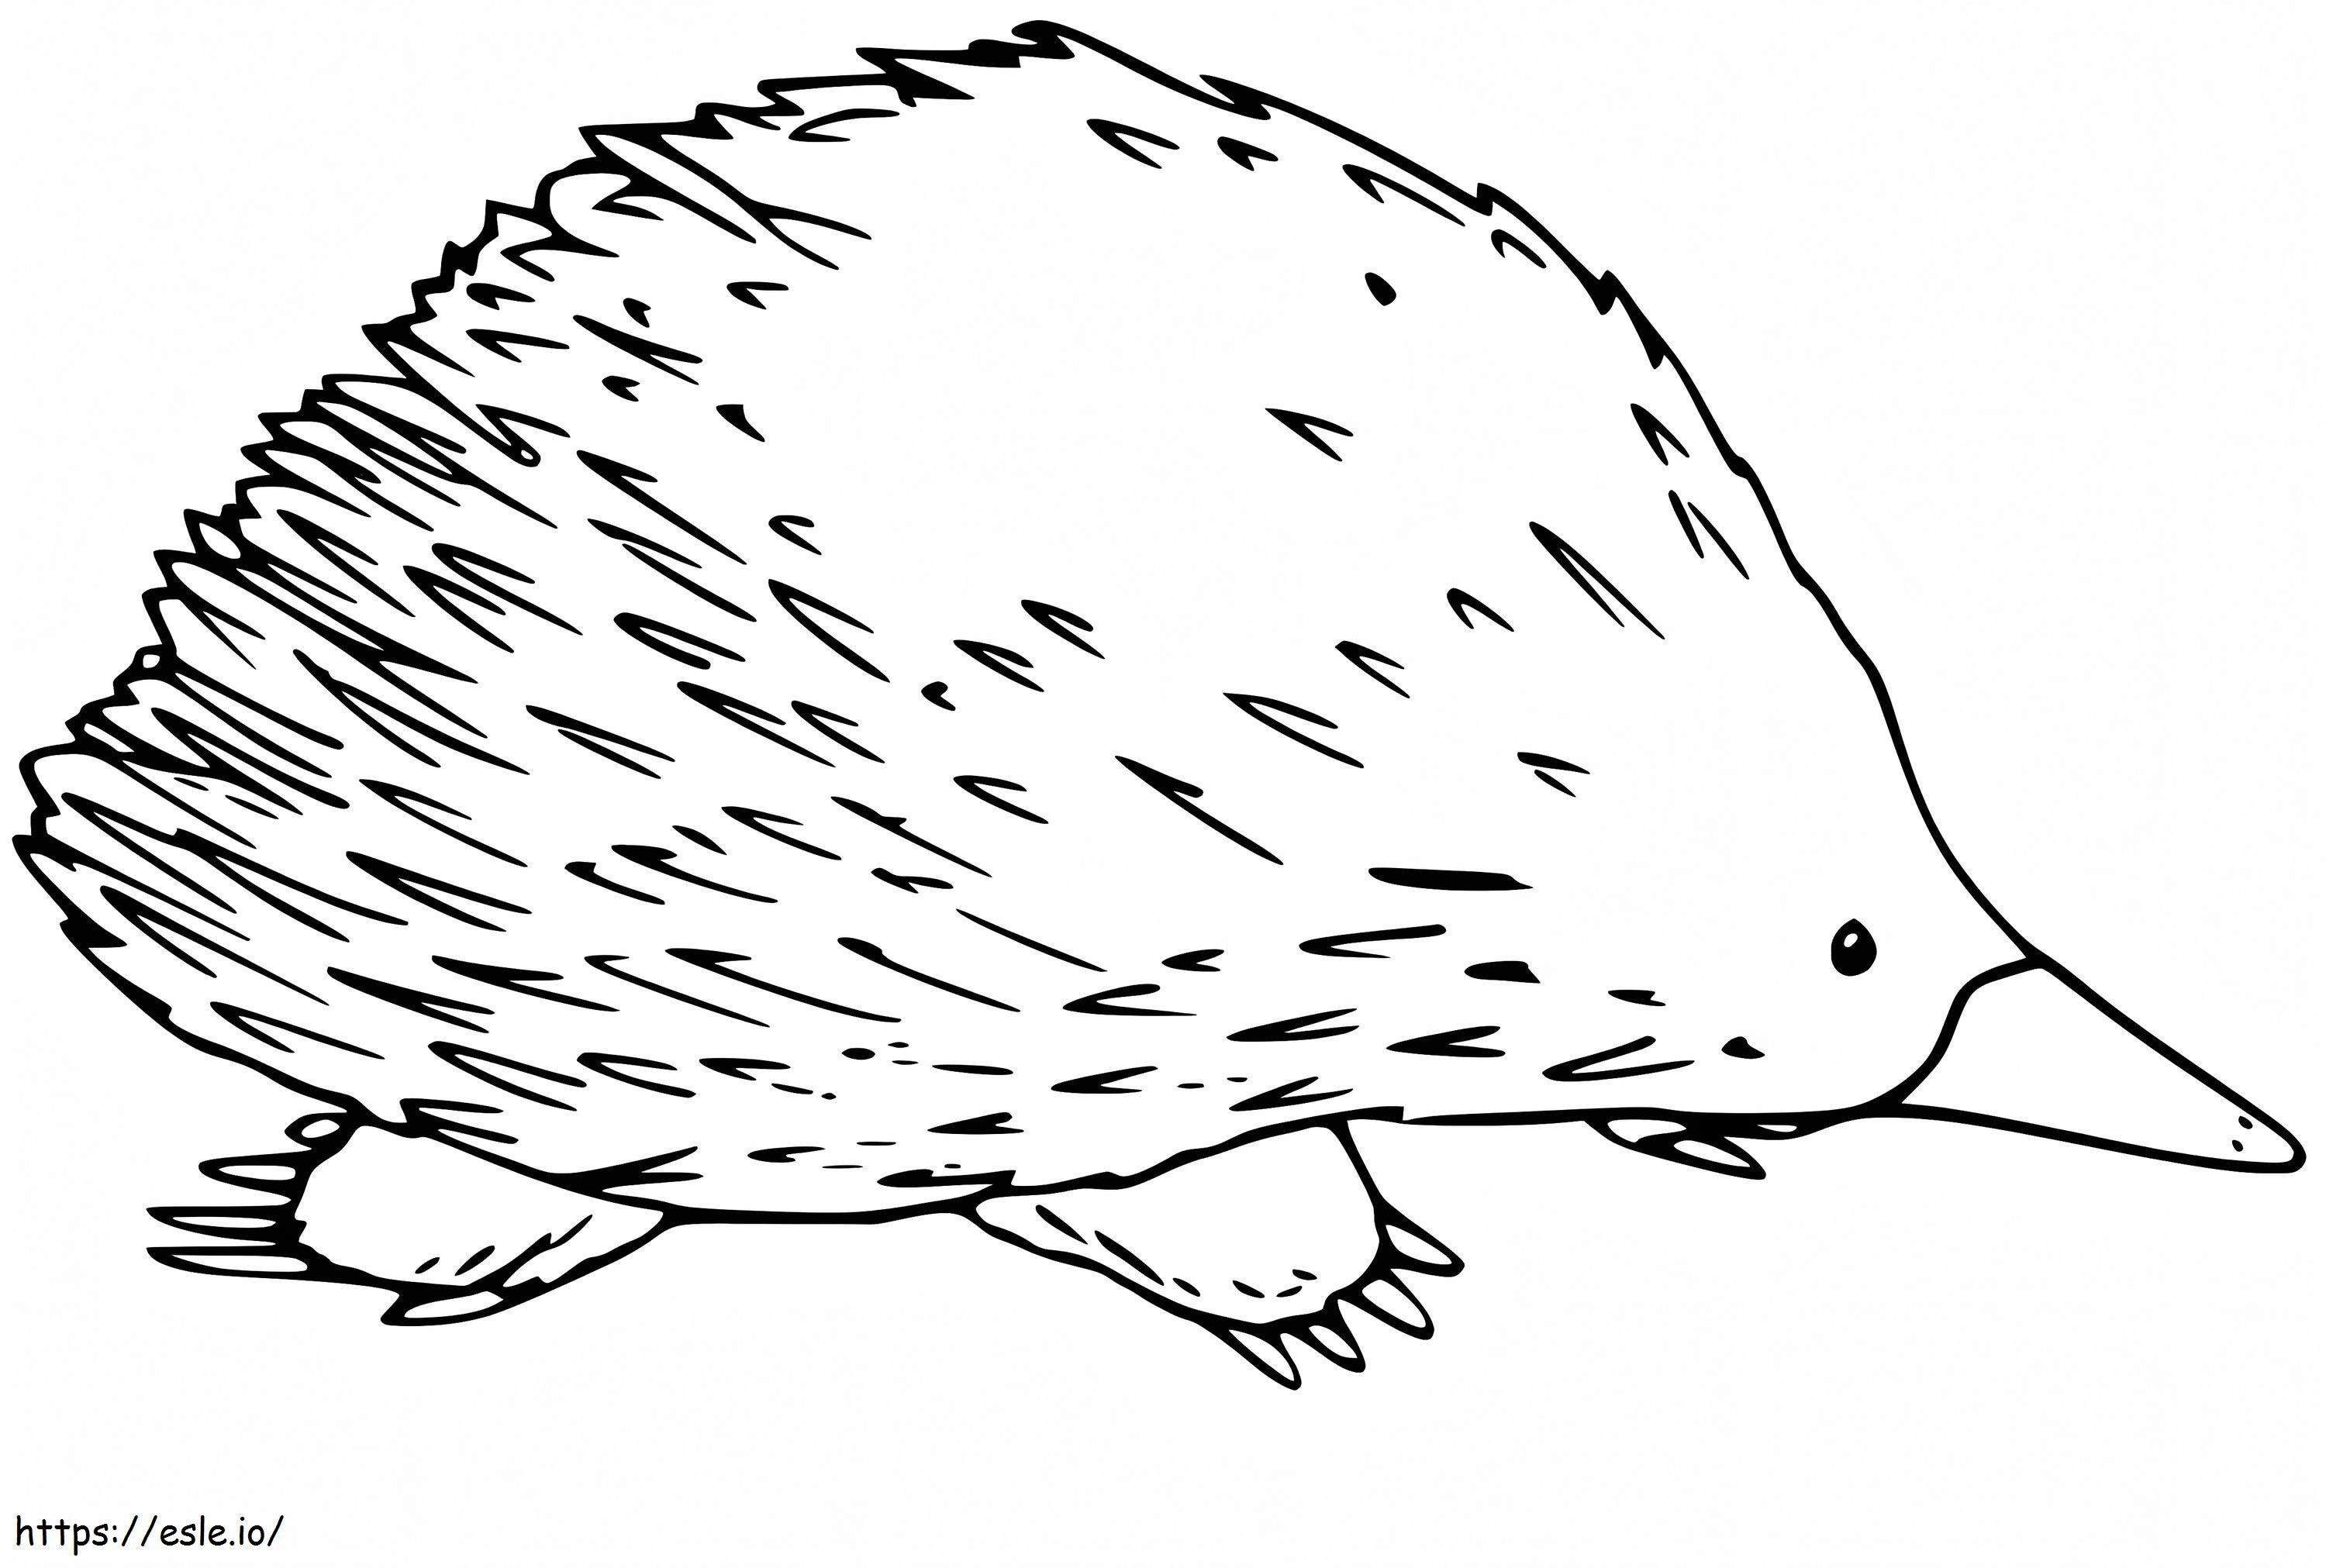 Printable Echidna coloring page